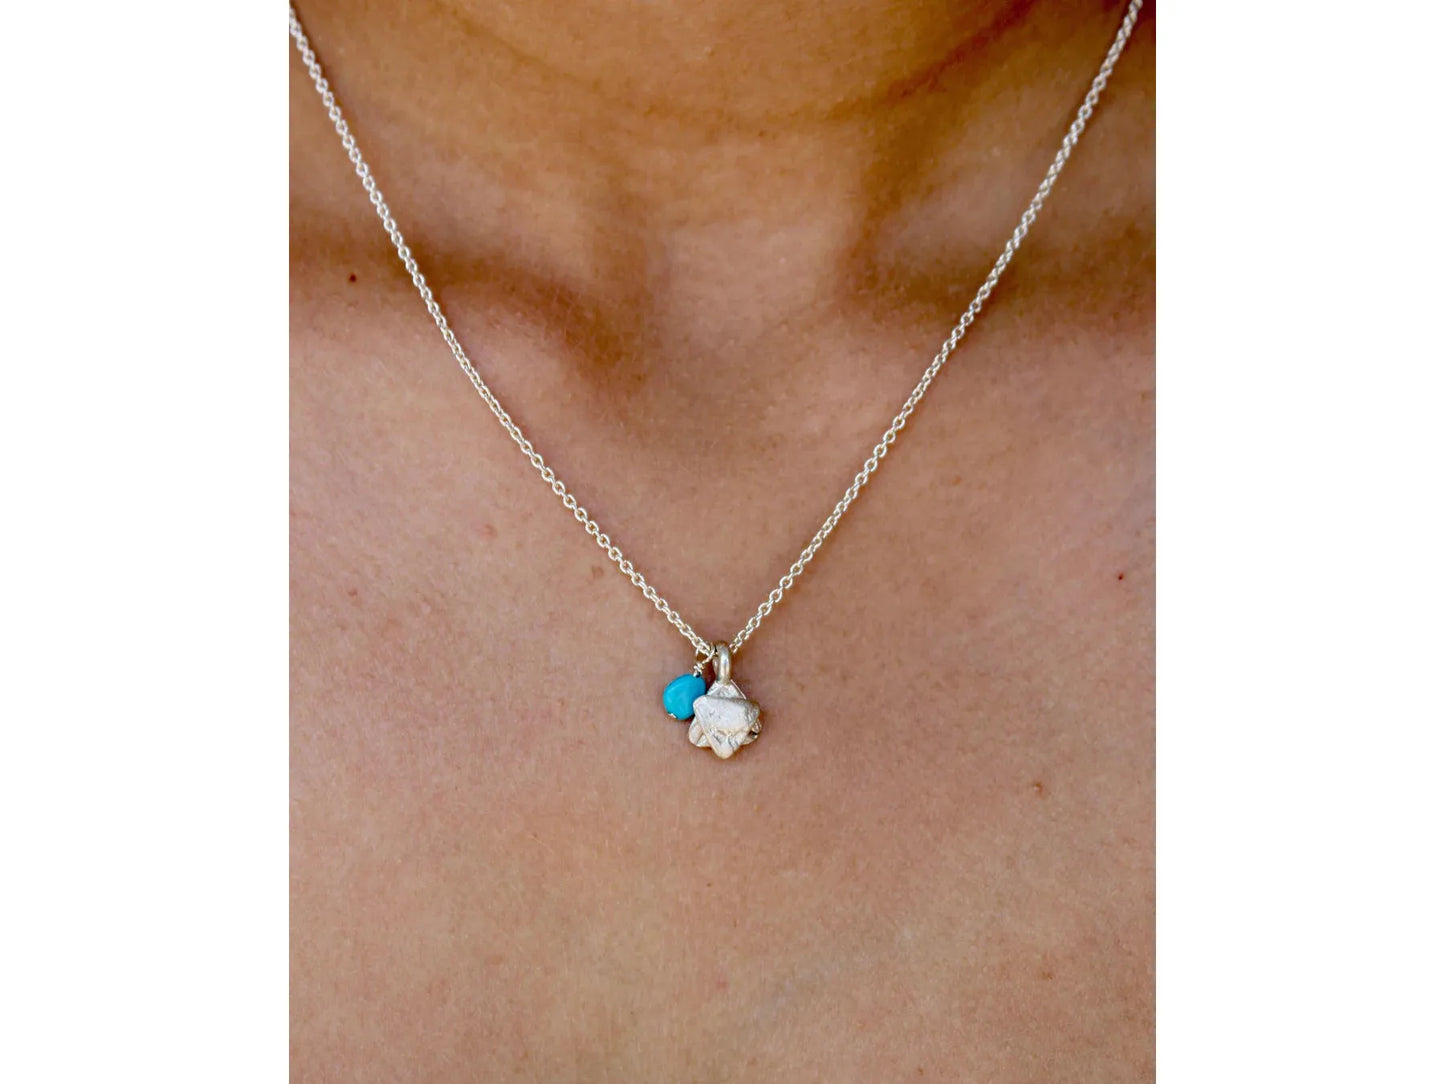 Star of David with Turquoise Bead, Jewish Necklace